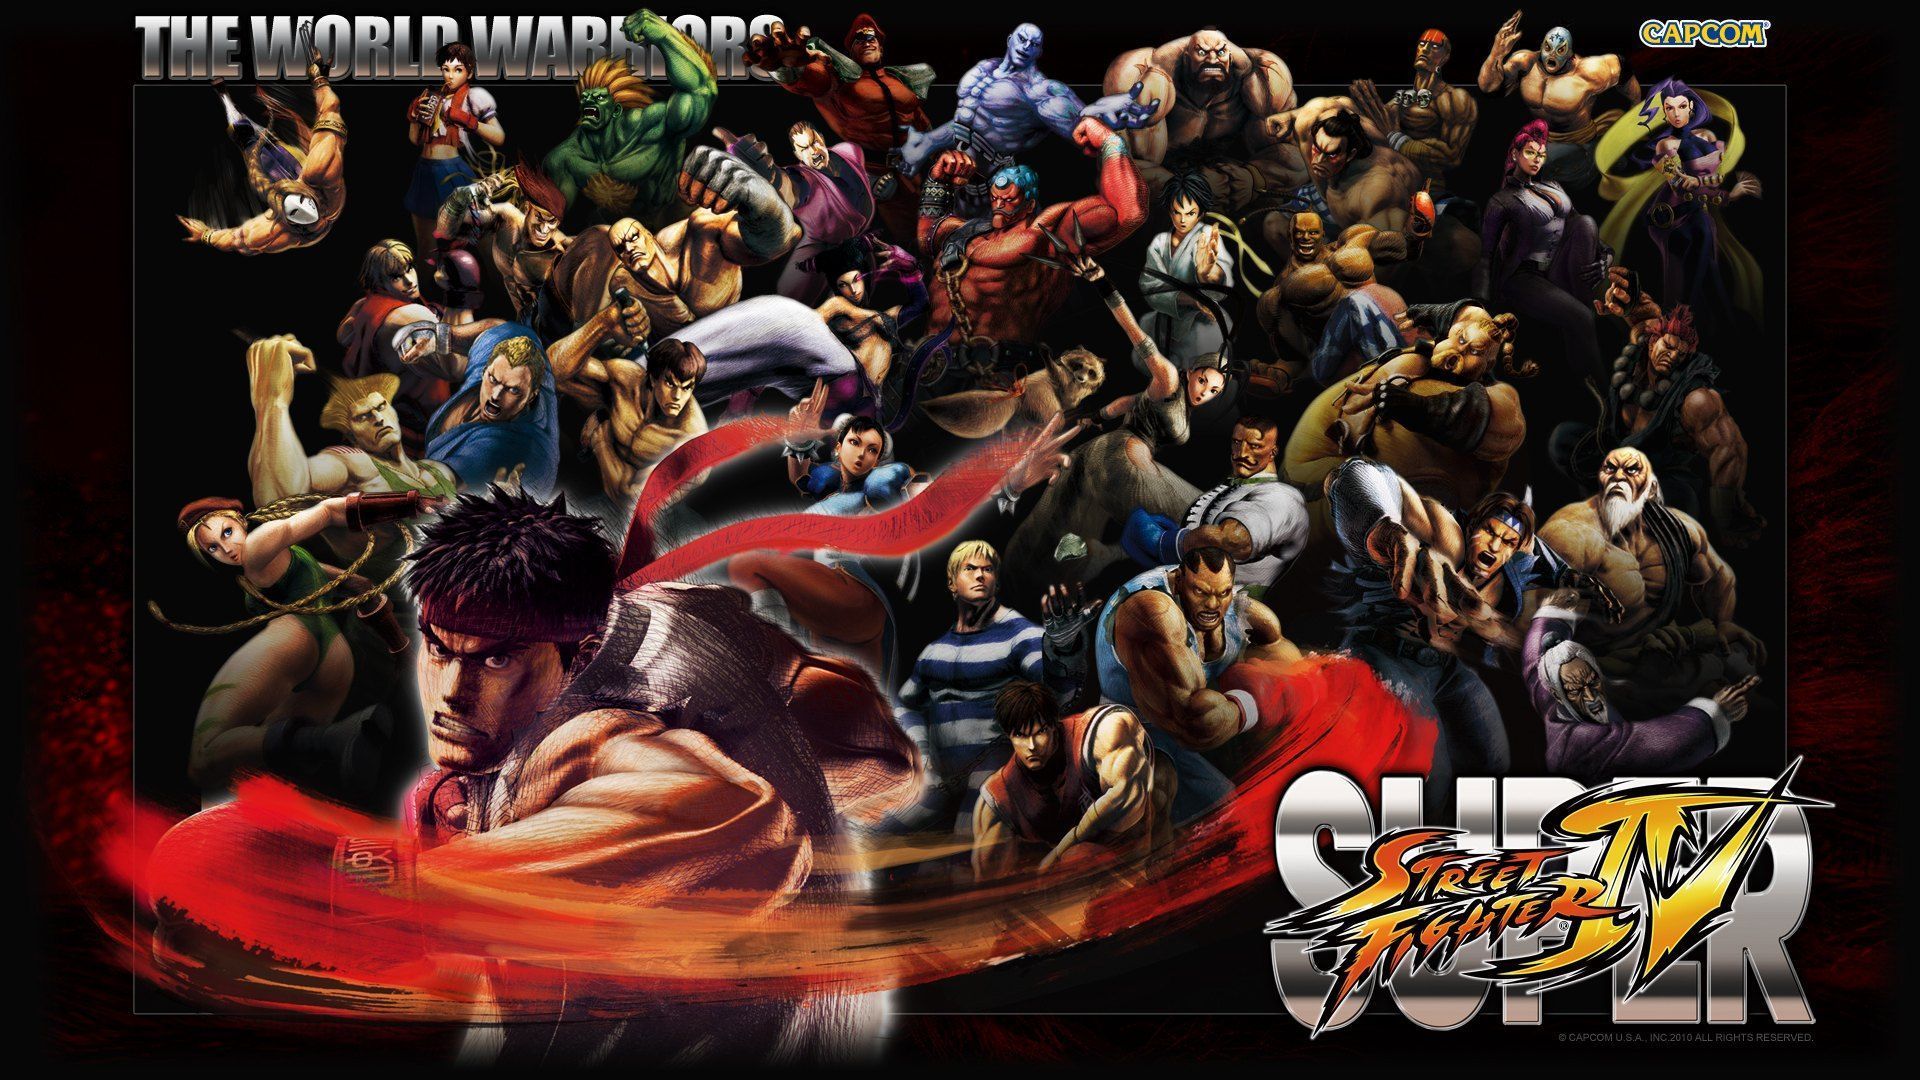 Street Fighter 4 HD Wallpapers